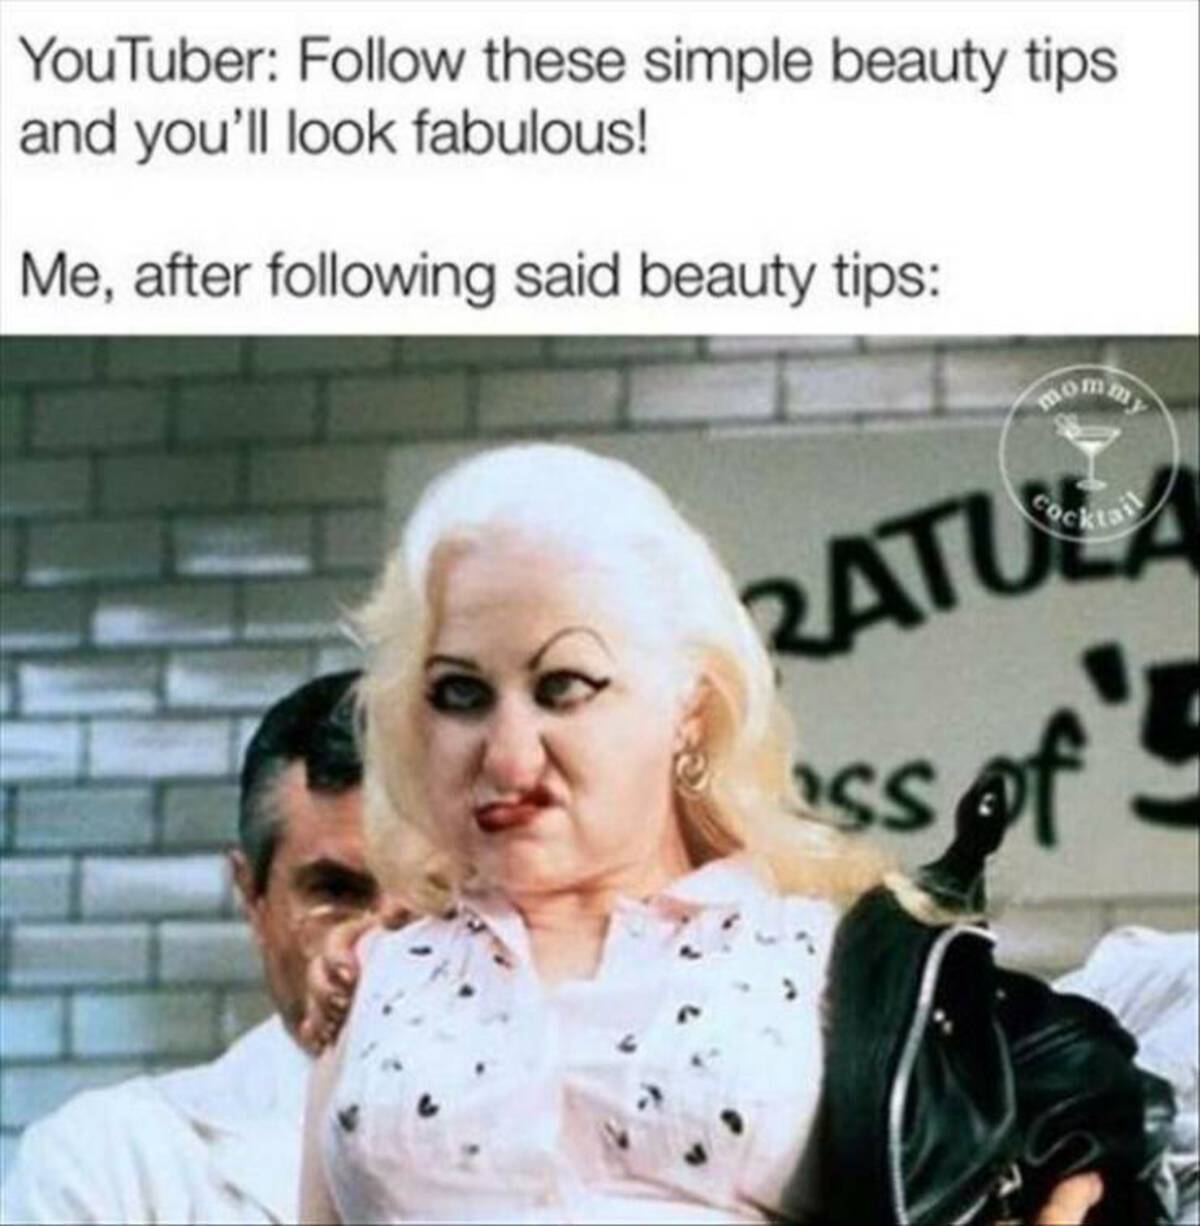 hatchet face cry baby cast - YouTuber these simple beauty tips. and you'll look fabulous! Me, after ing said beauty tips momm Cocktail Ratula ss of